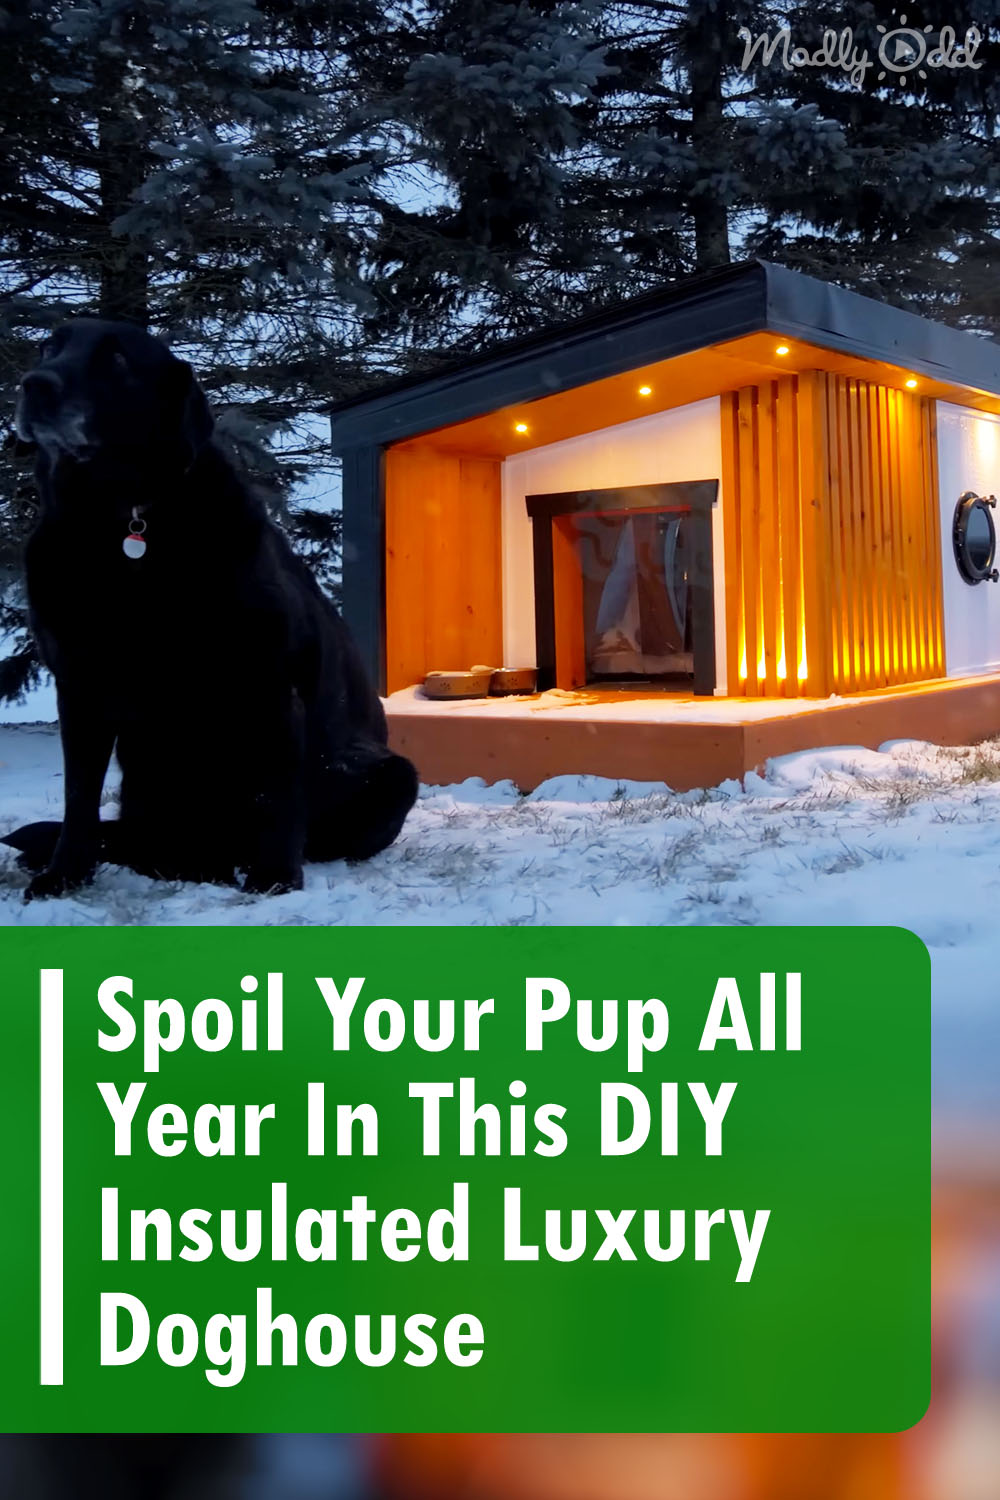 Spoil Your Pup All Year In This DIY Insulated Luxury Doghouse